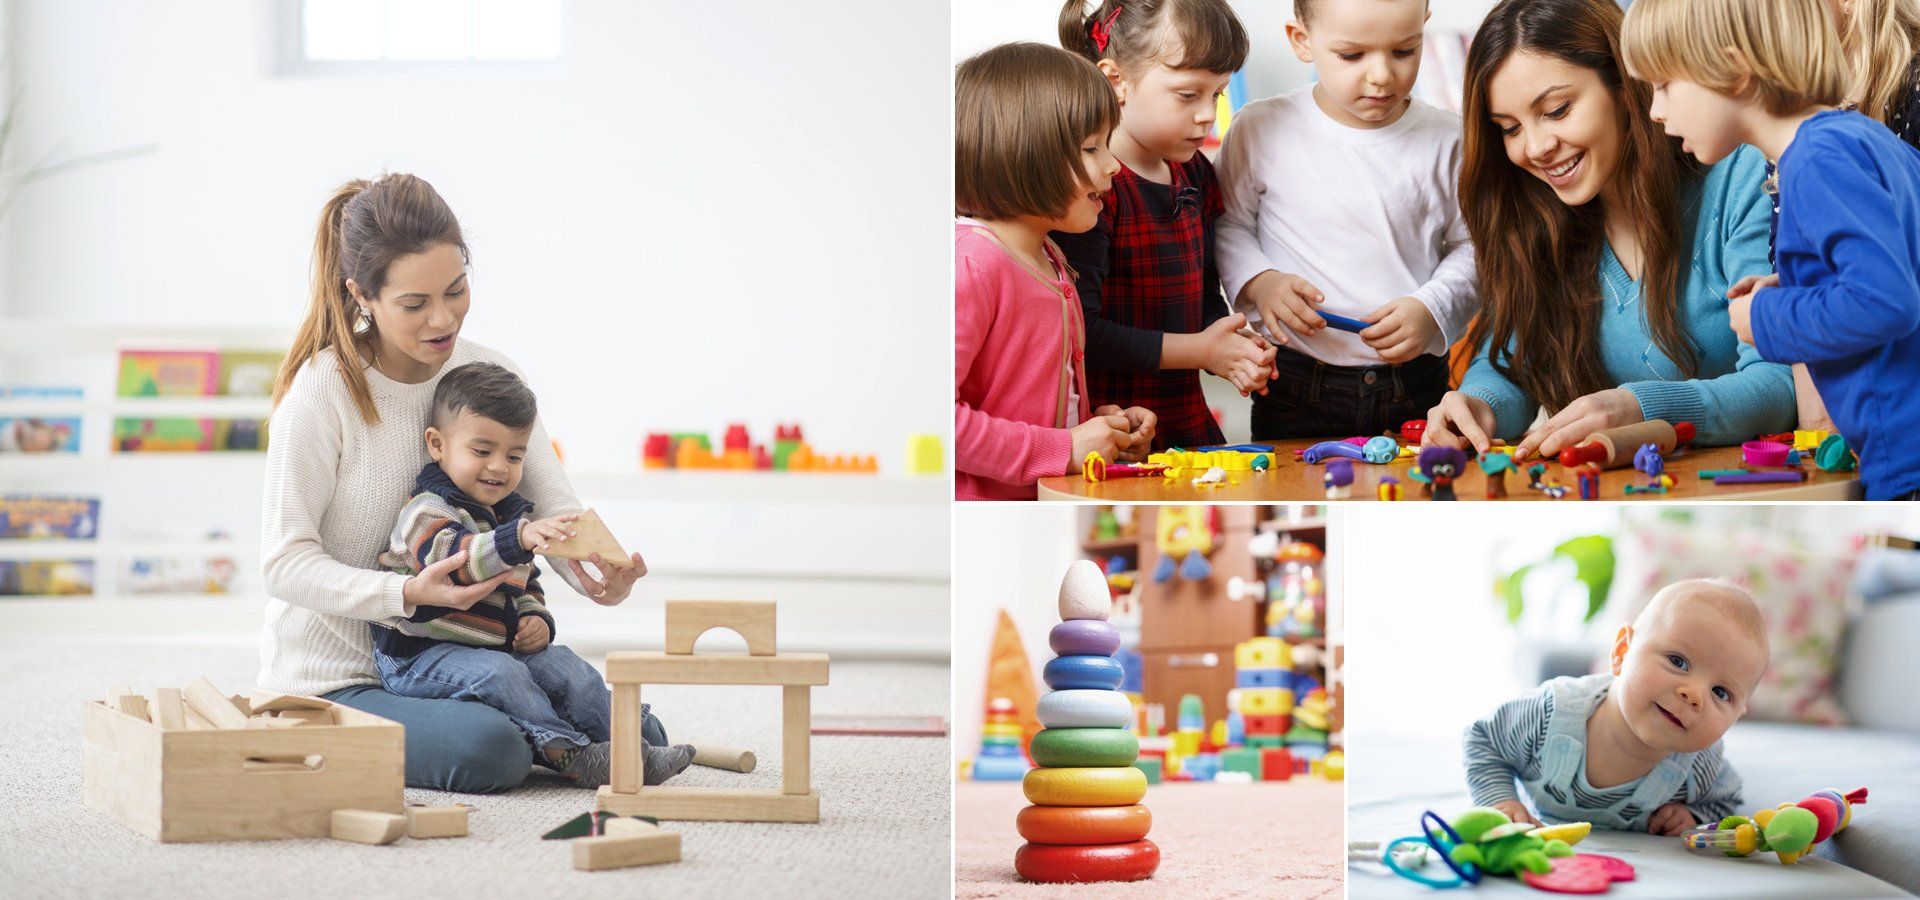 activities at the nursery for babies and toddlers